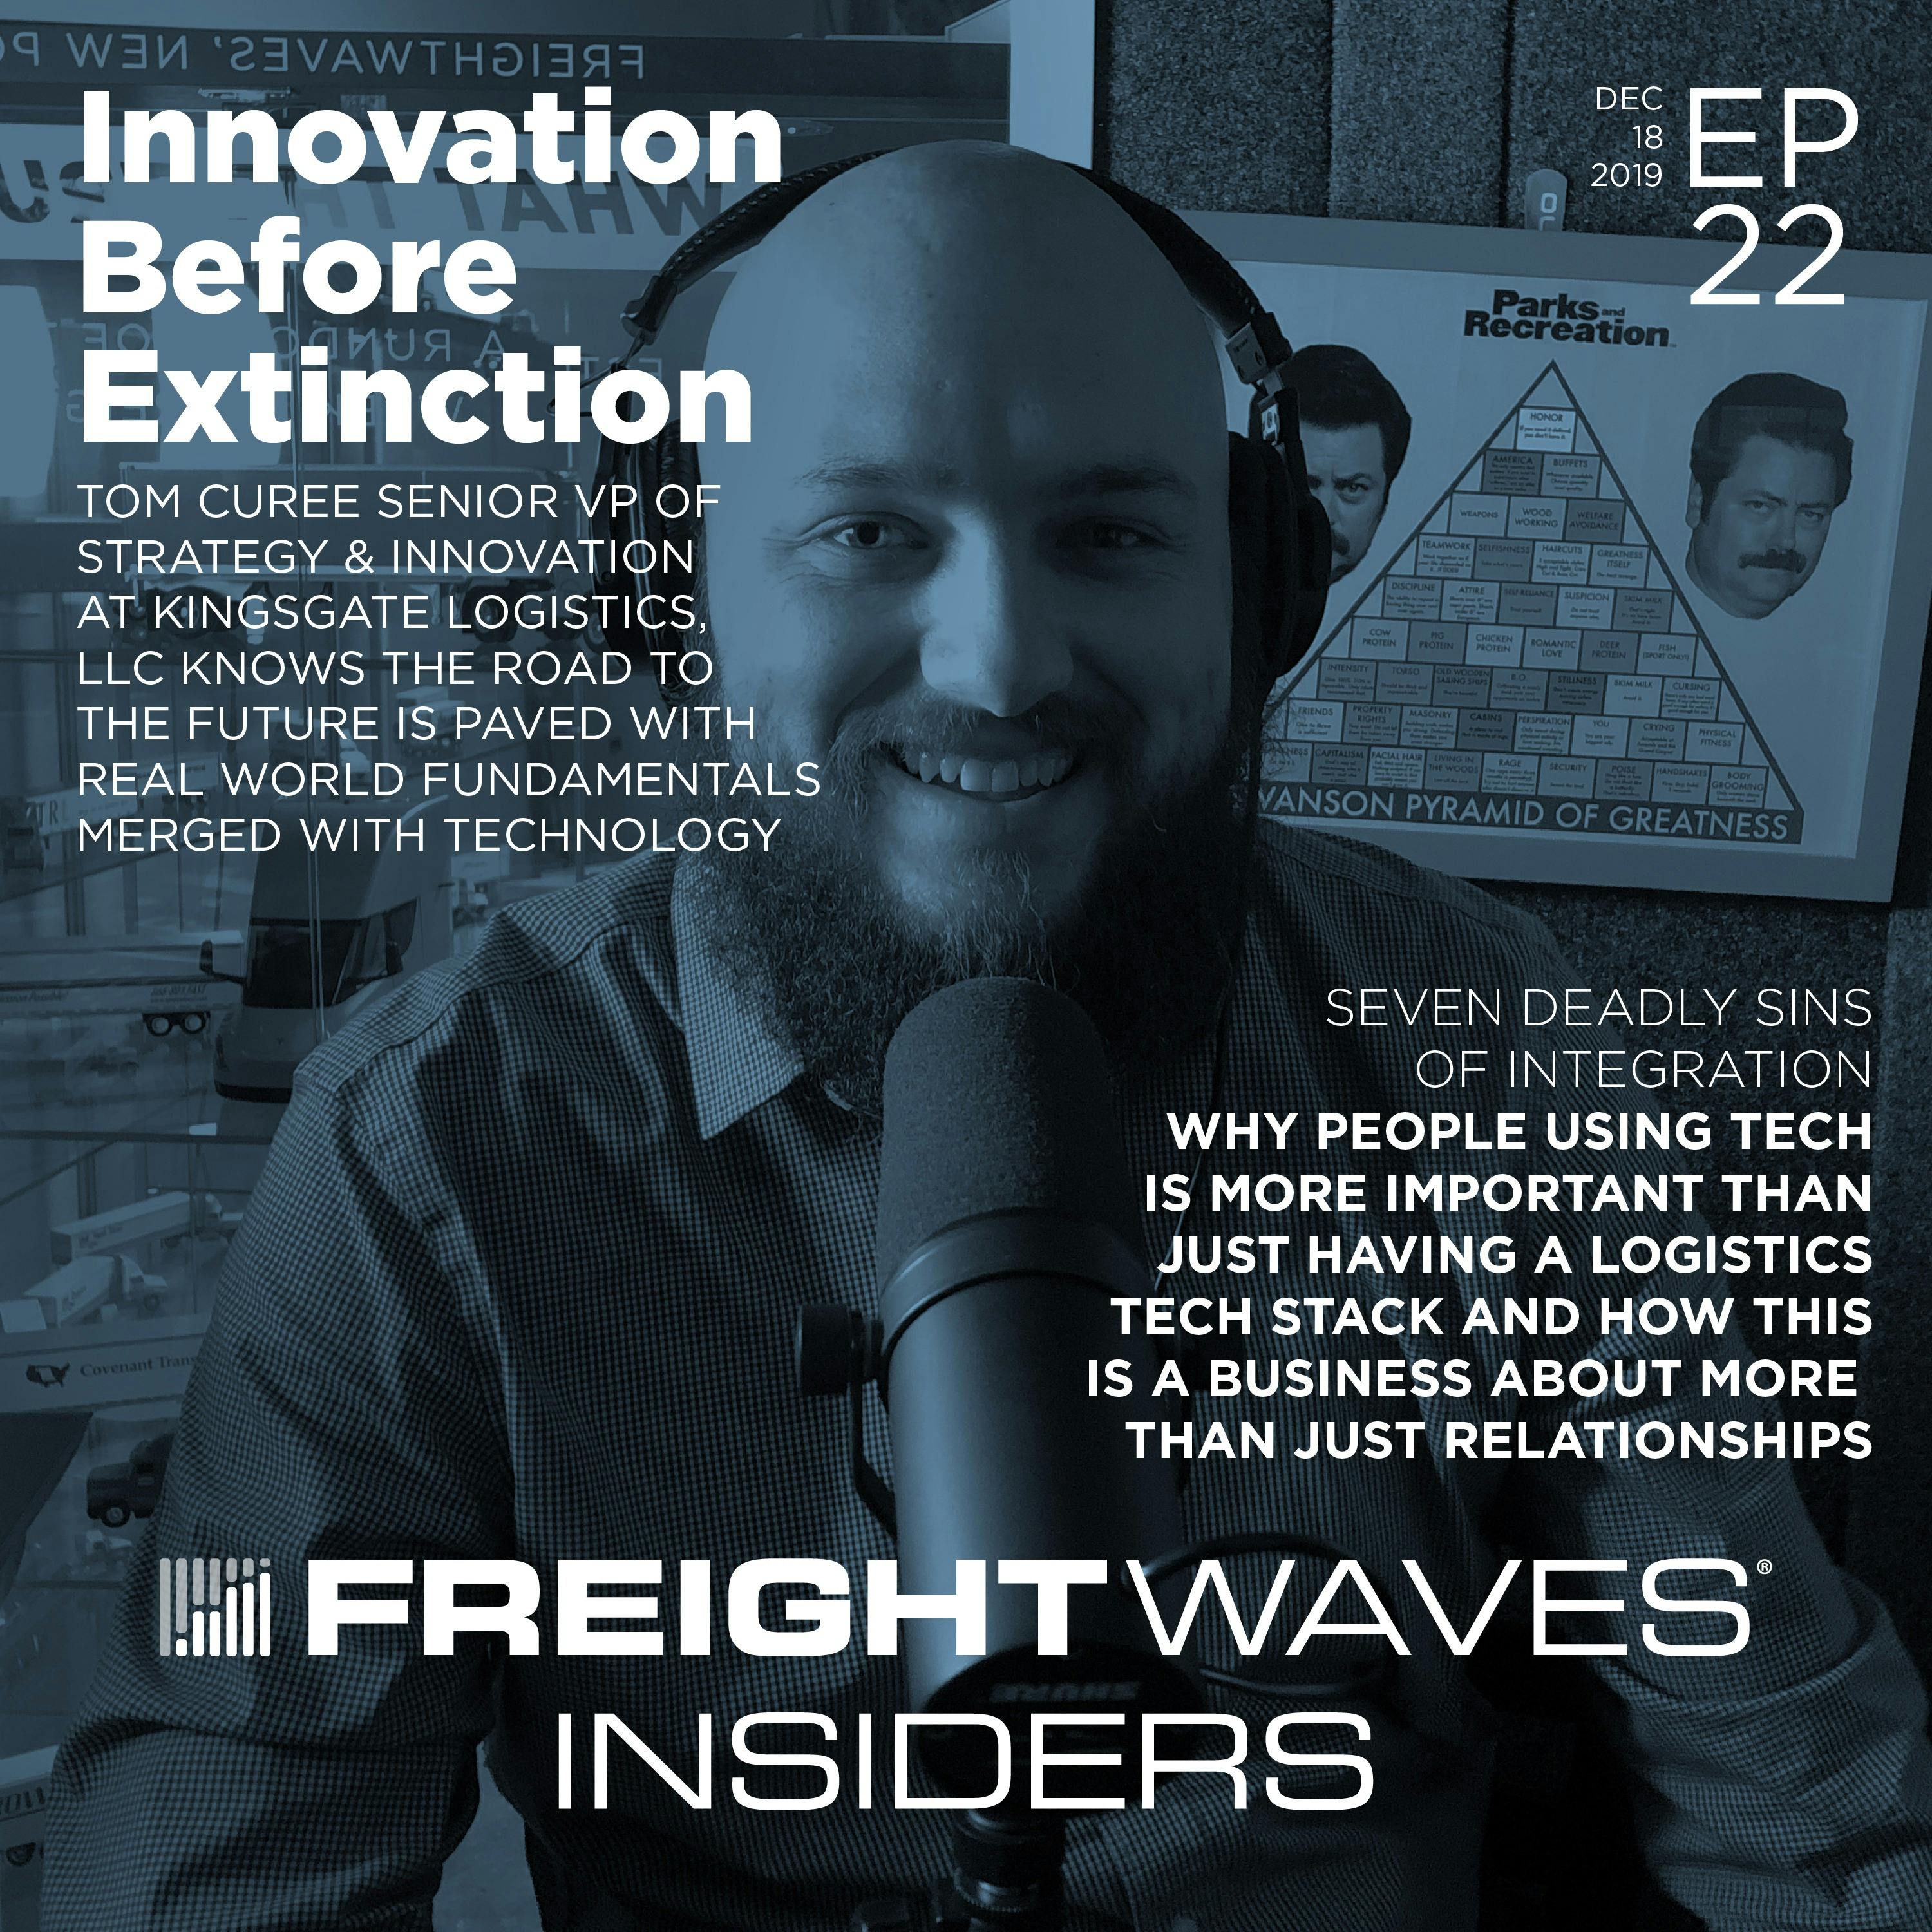 Innovation before extinction with Tom Curee of Kingsgate Logistics